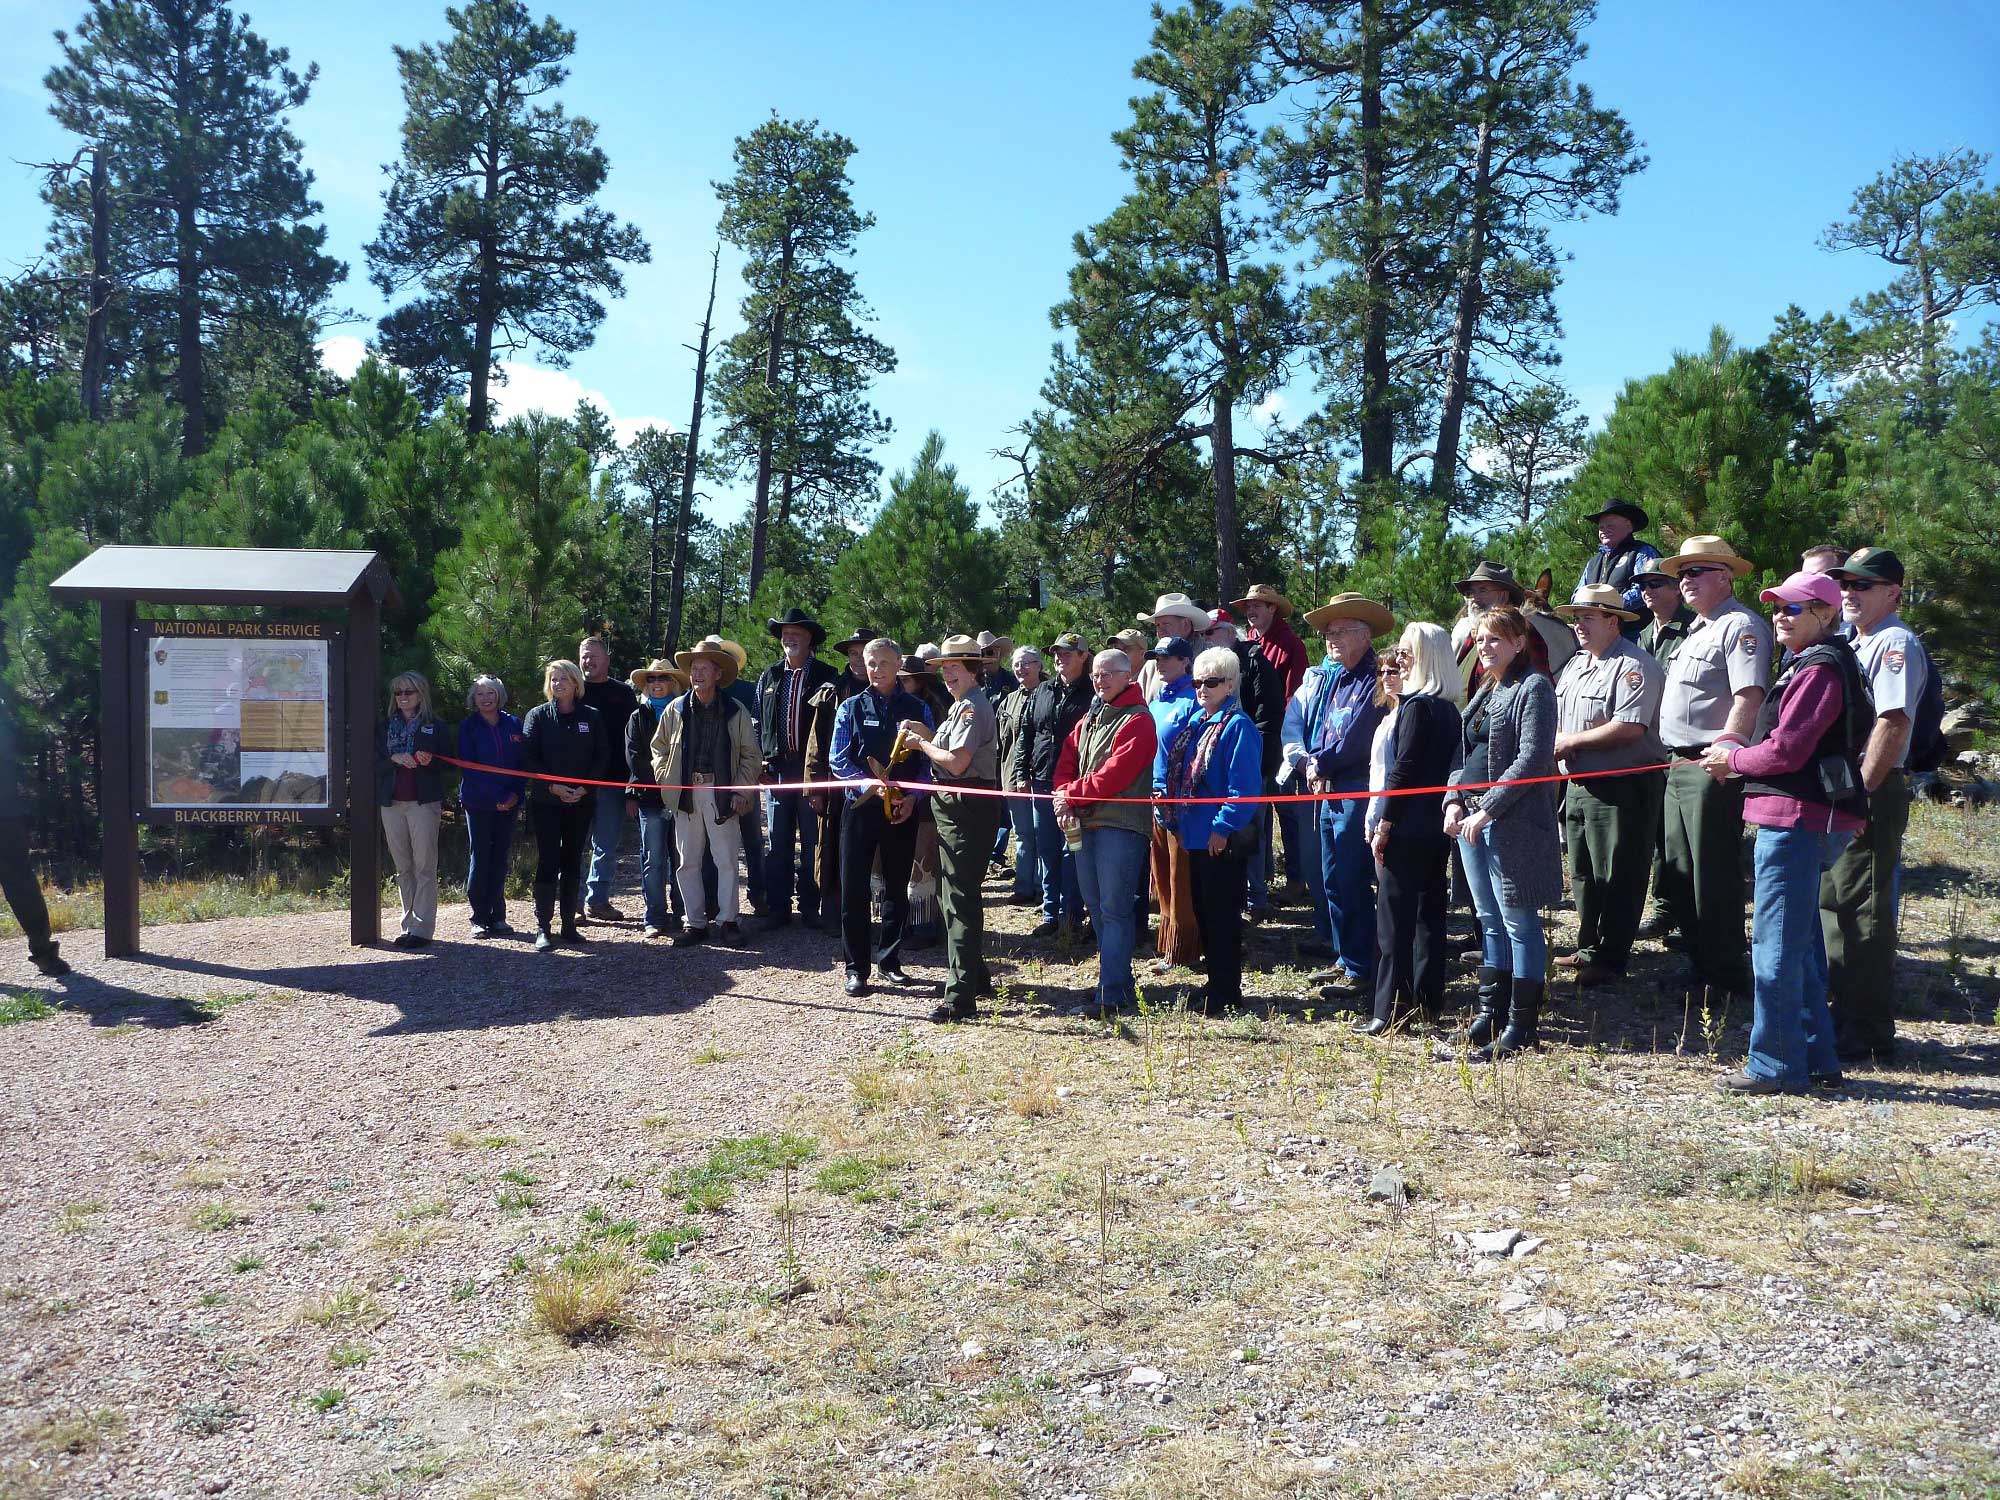 Superintendent Cheryl A. Schreier and President of the Mount Rushmore Society Tim Raben cut the ribbon on the Blackberry Trail.